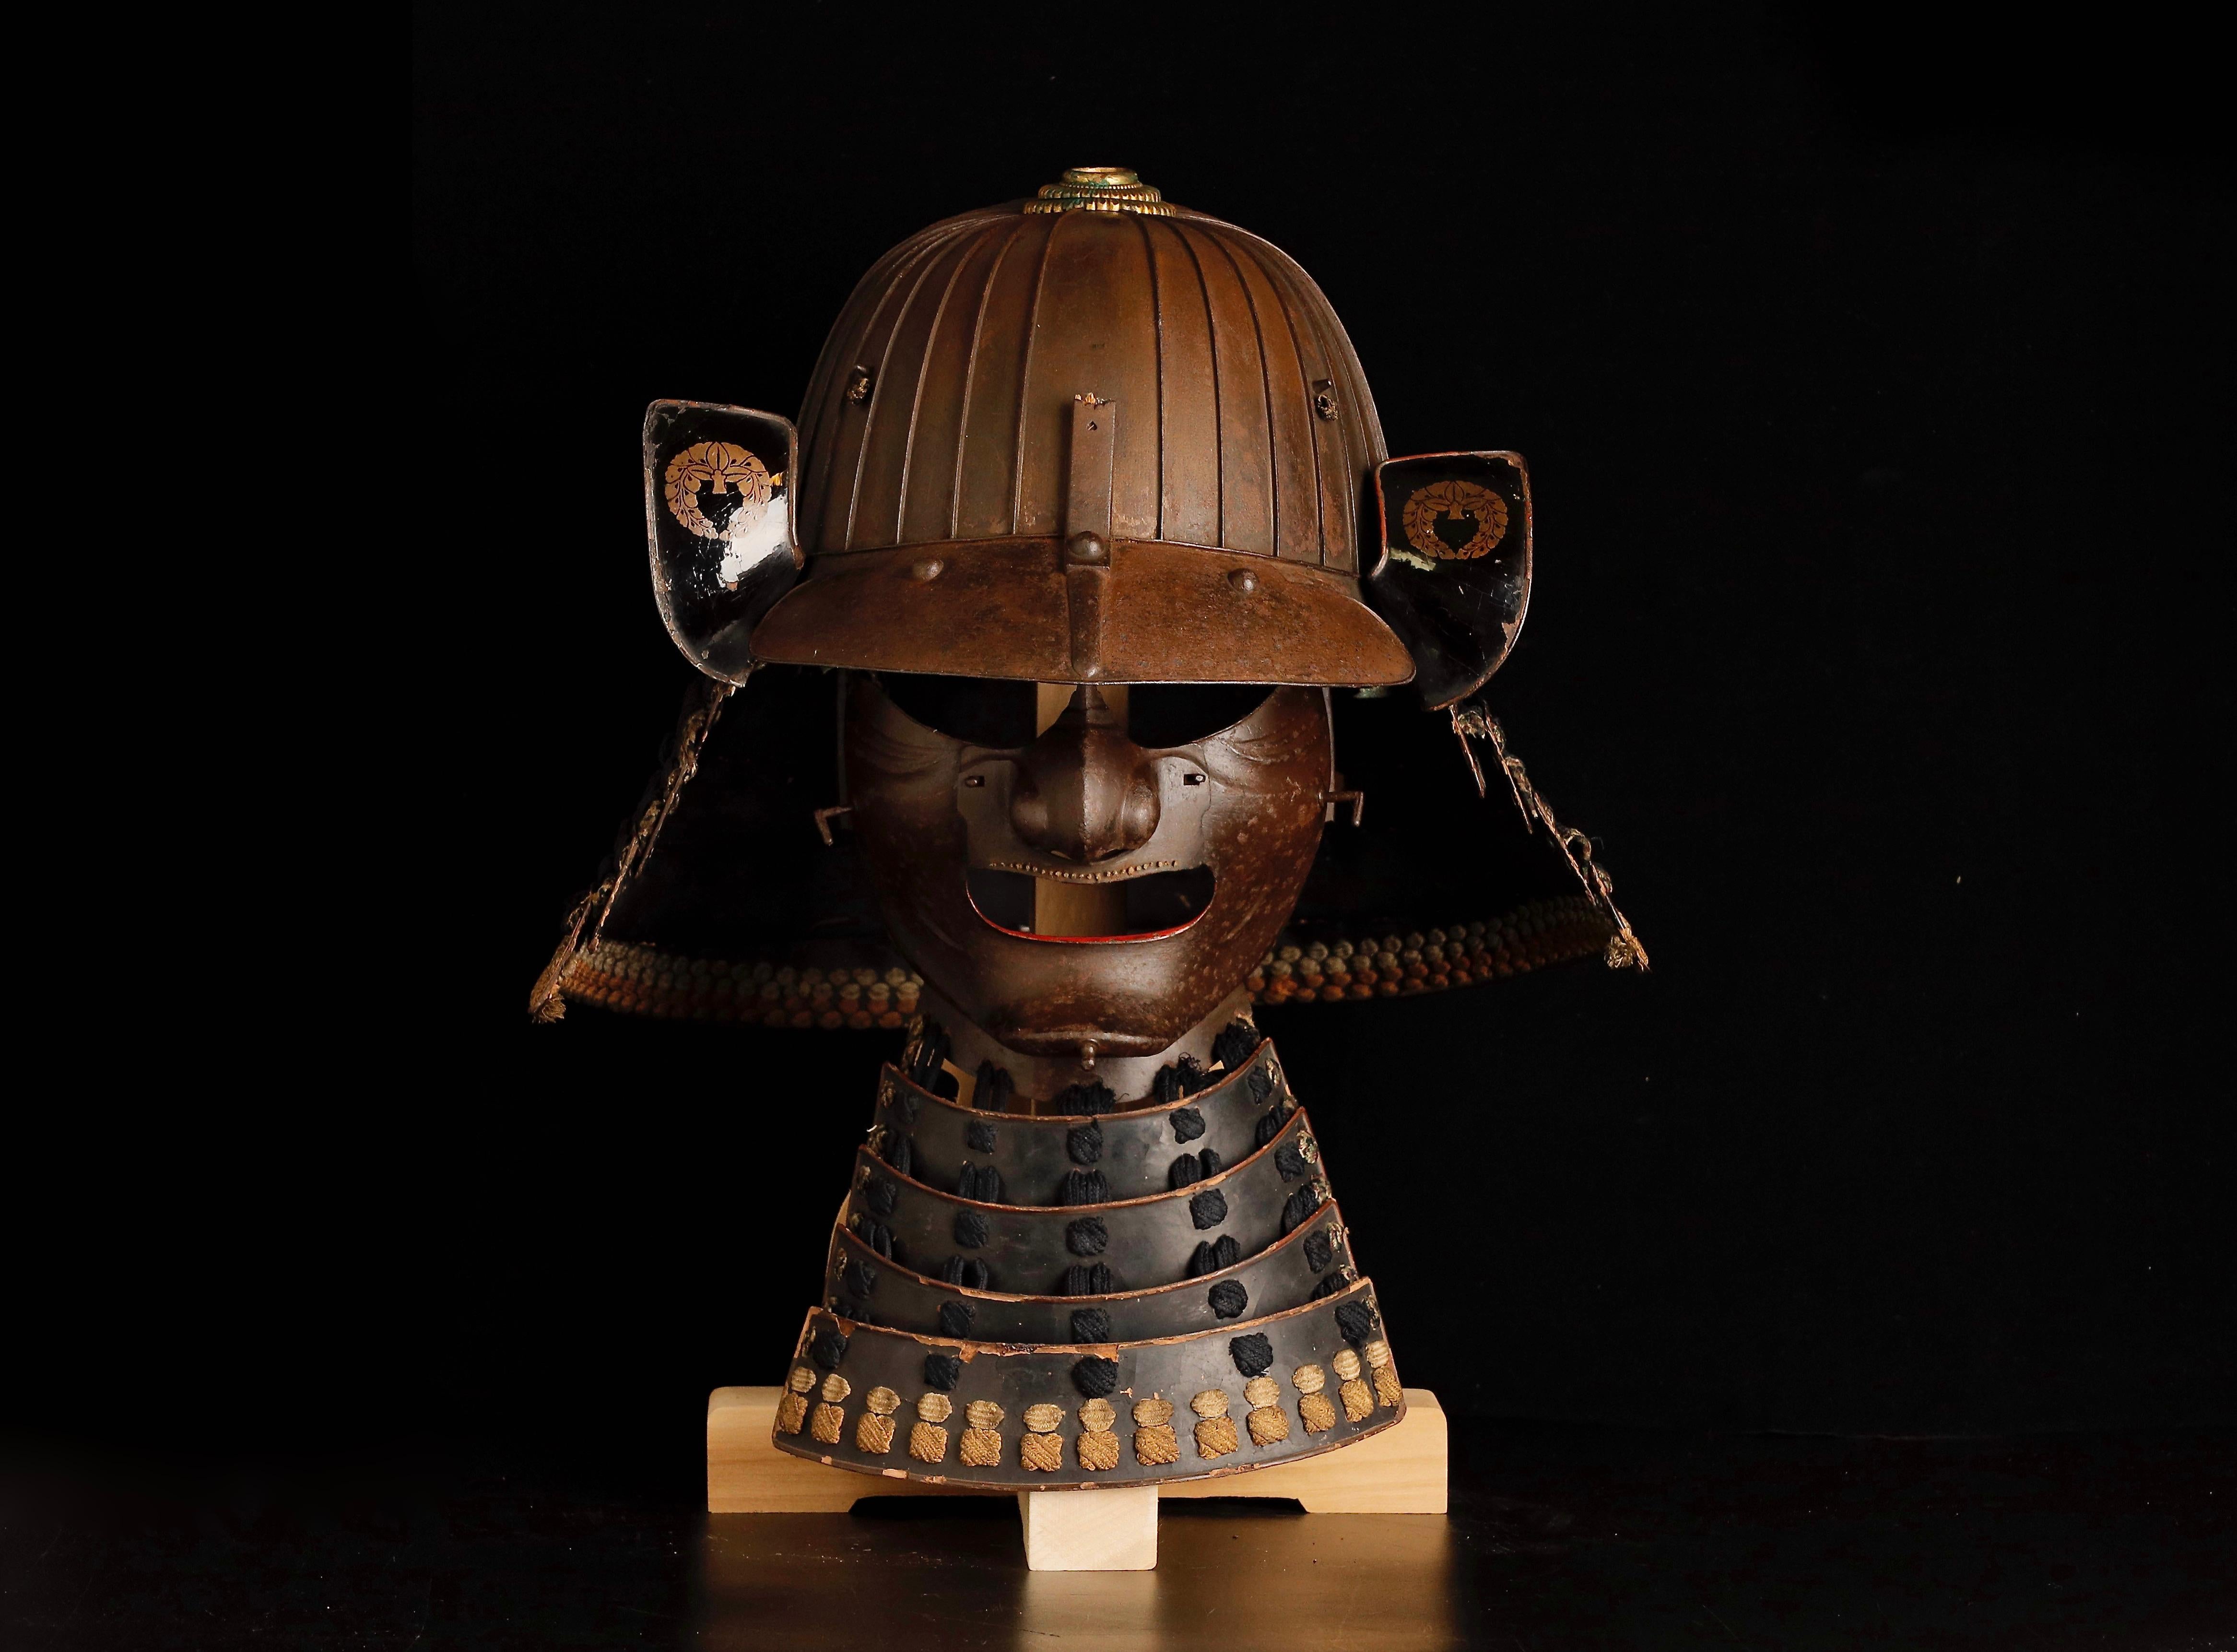 Leather Edo-Era Samurai Helmet and Mask Set, an Authentic Piece of History from the 17th